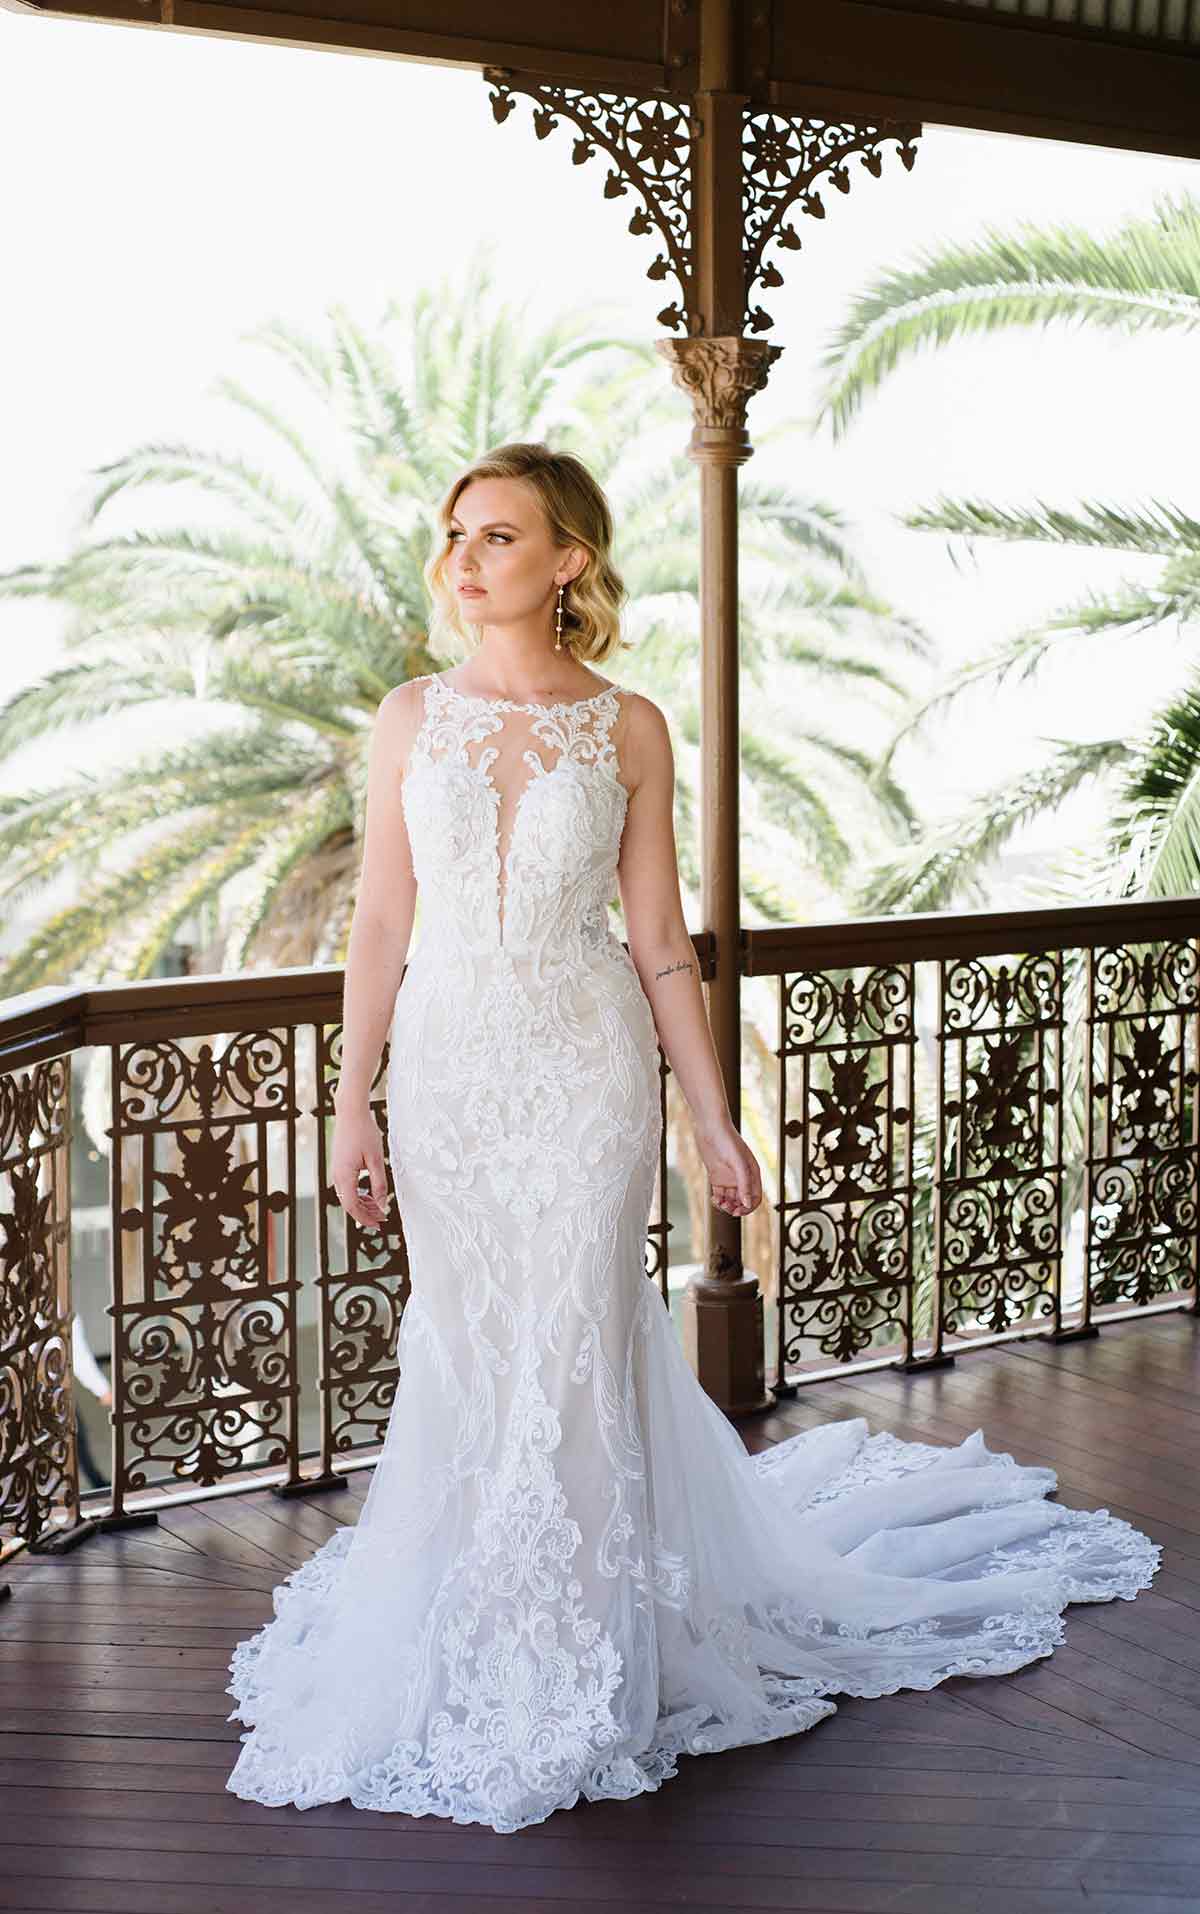 HIGH-NECK LACE WEDDING DRESS WITH SHEER DETAILS